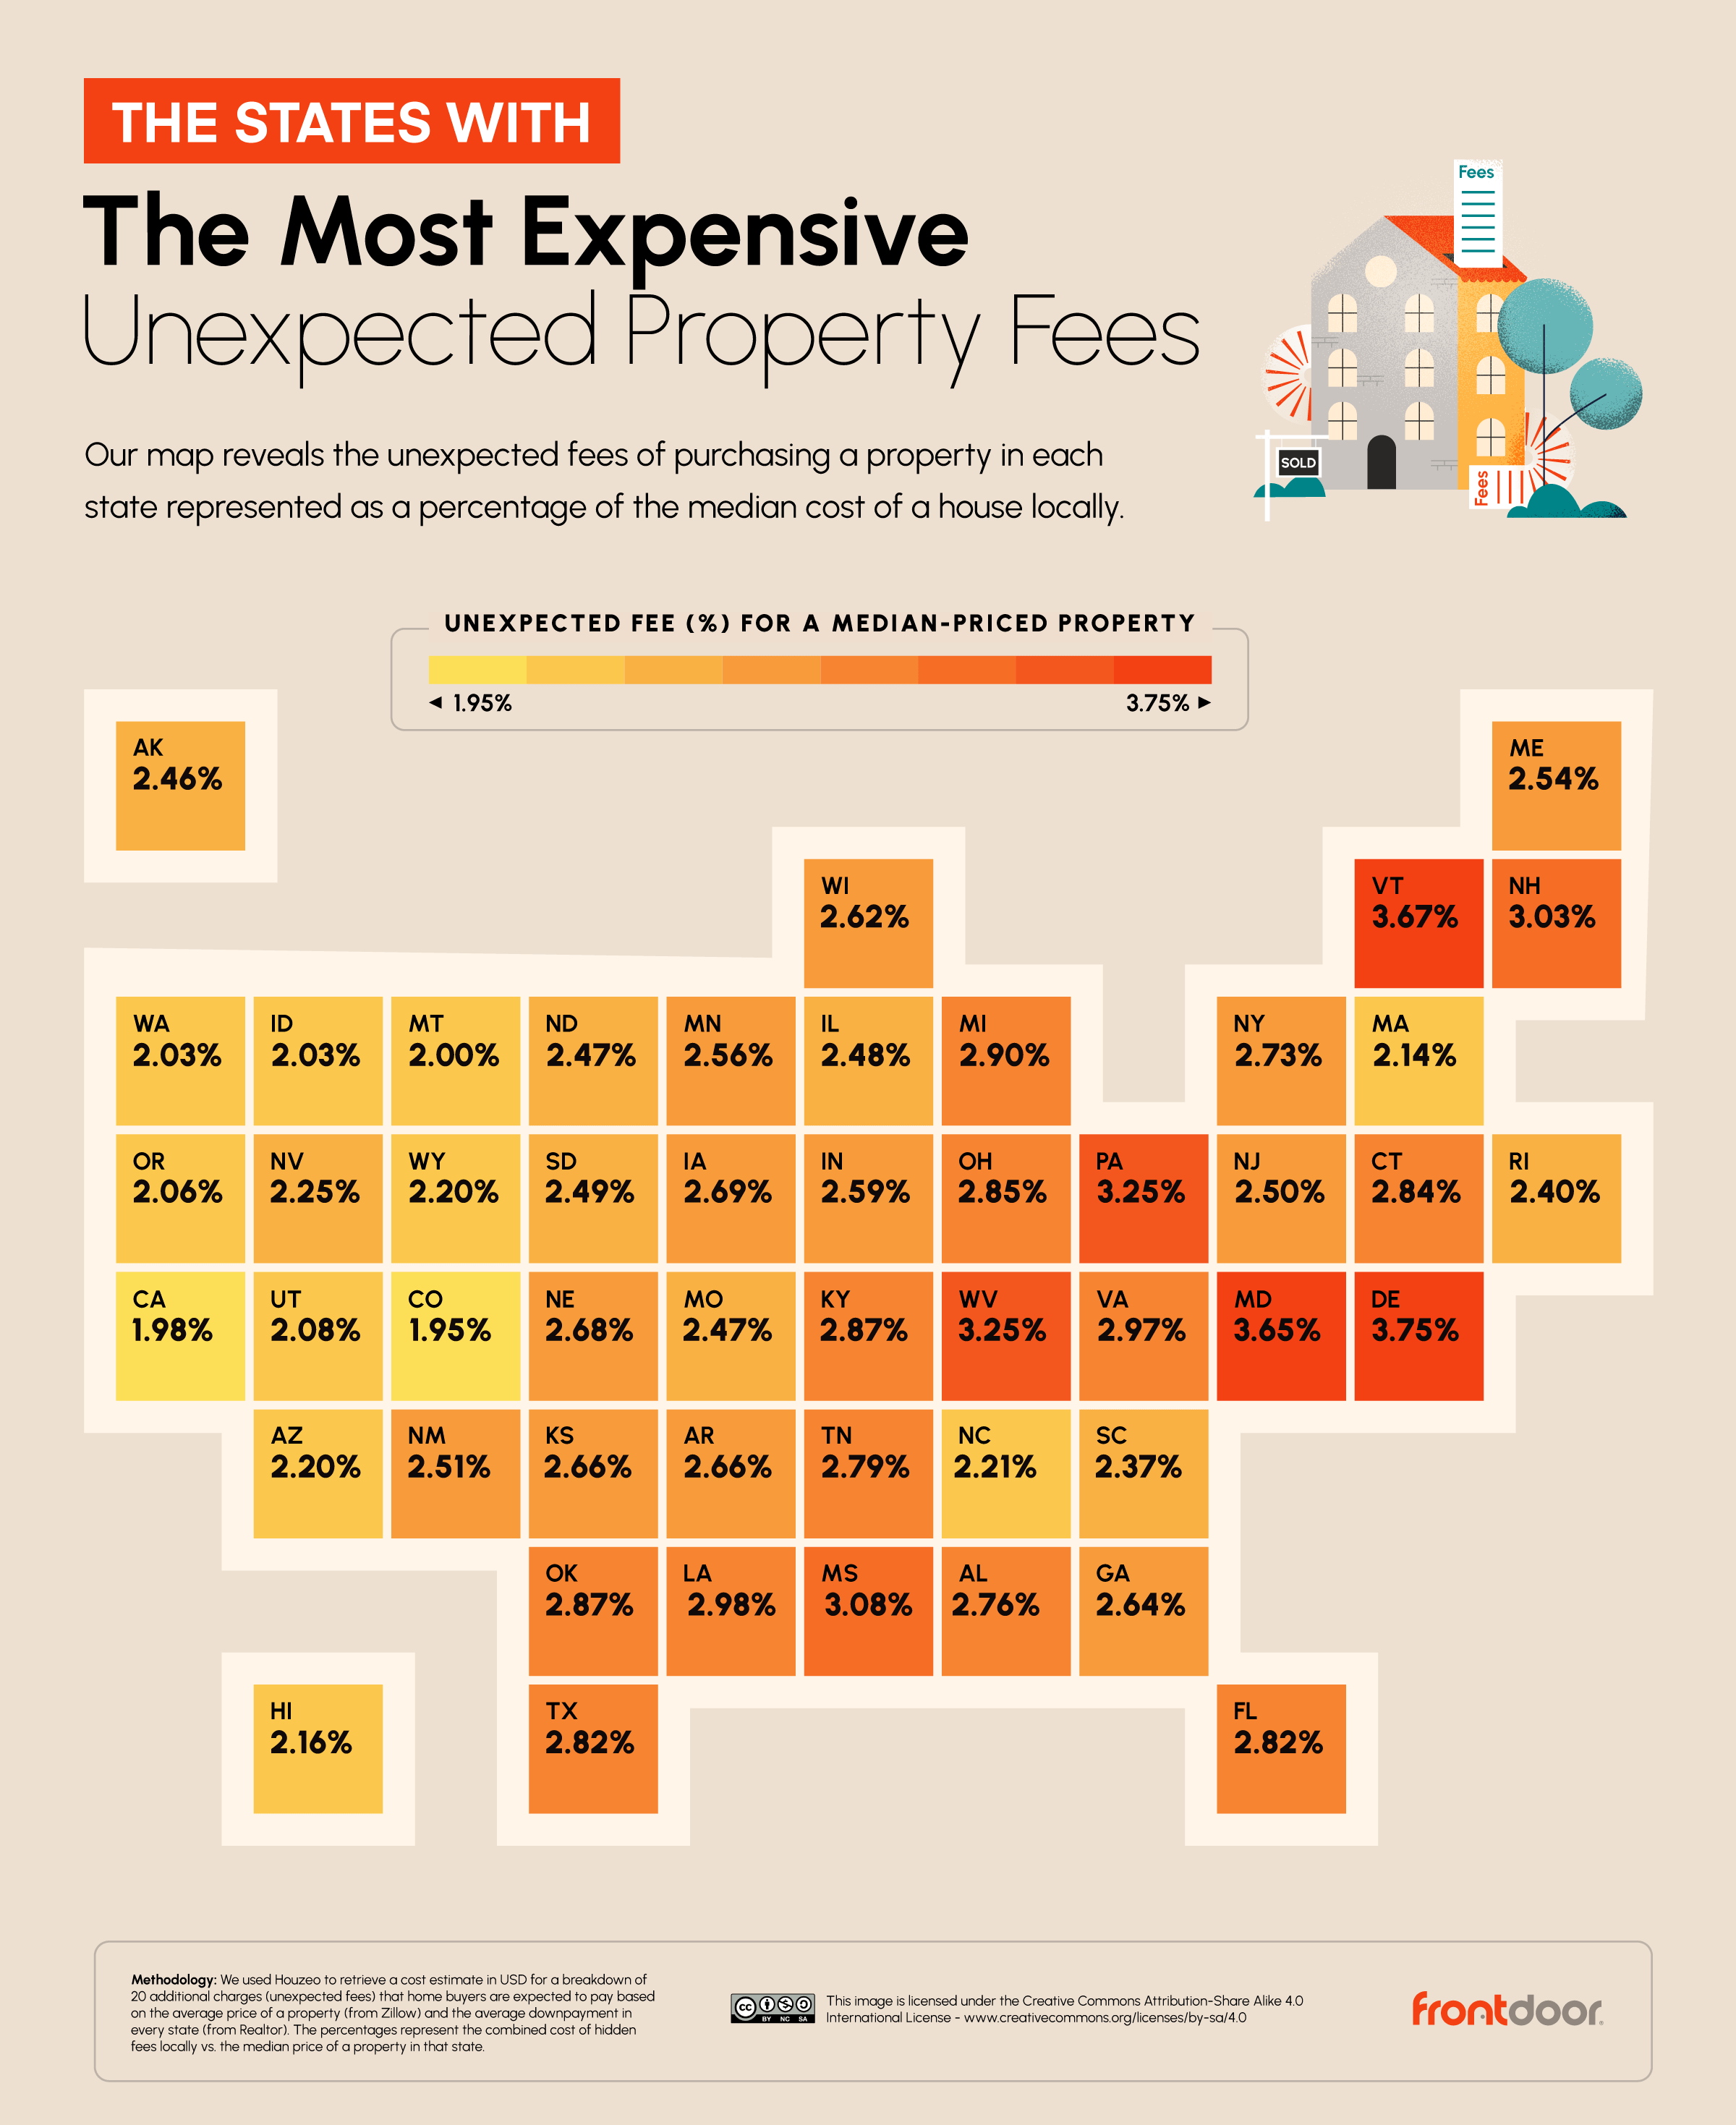 States with the Most Unexpected Property fees